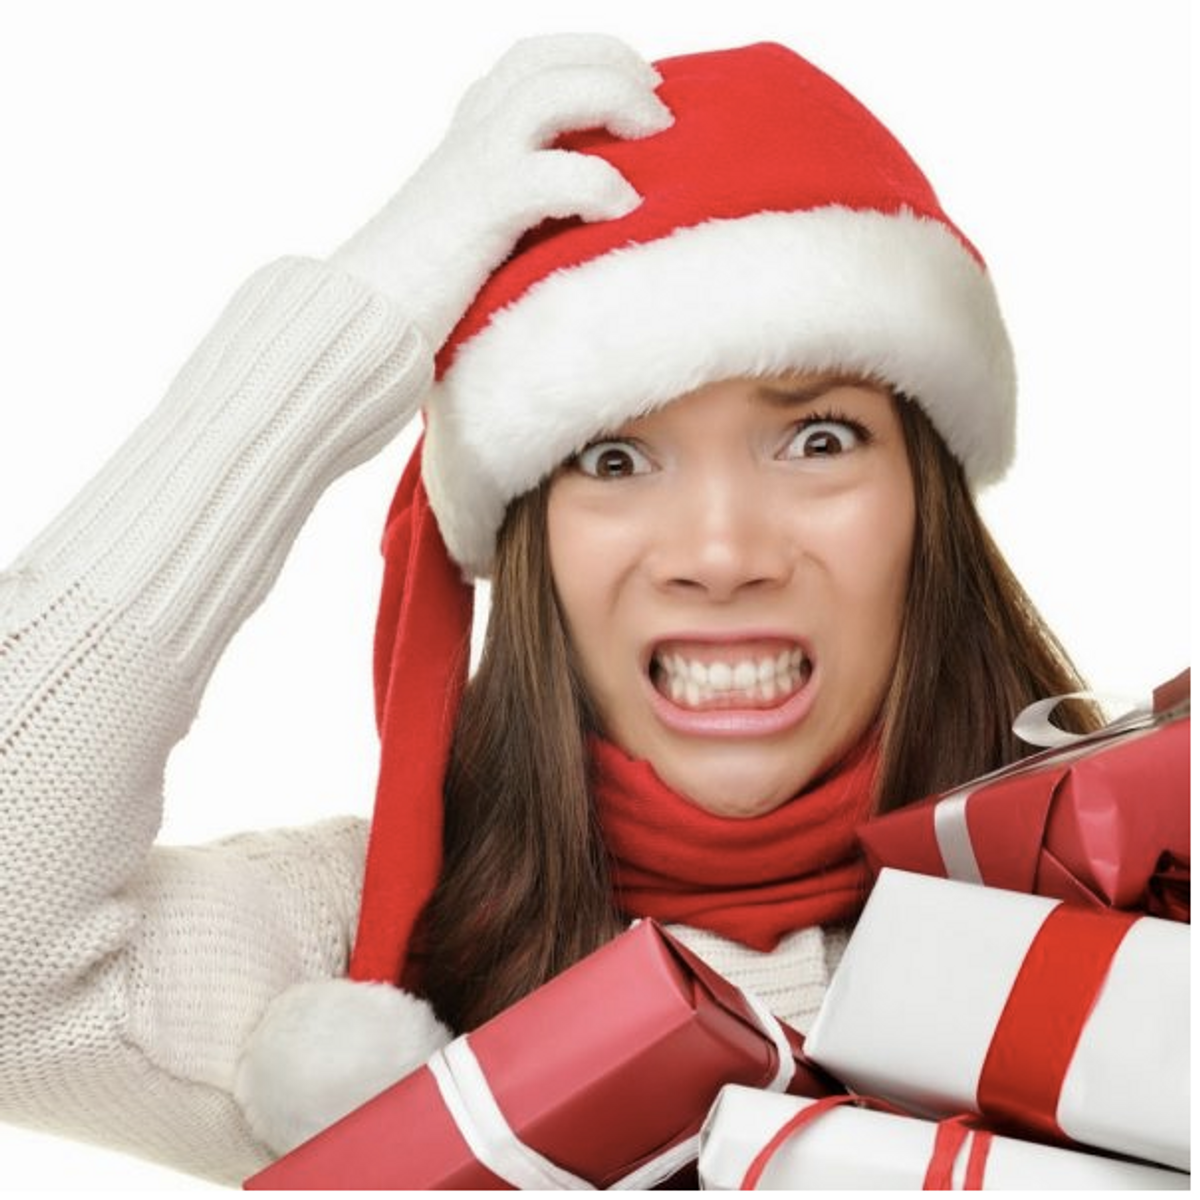 7 Things You Stress About 7 Days Before Christmas